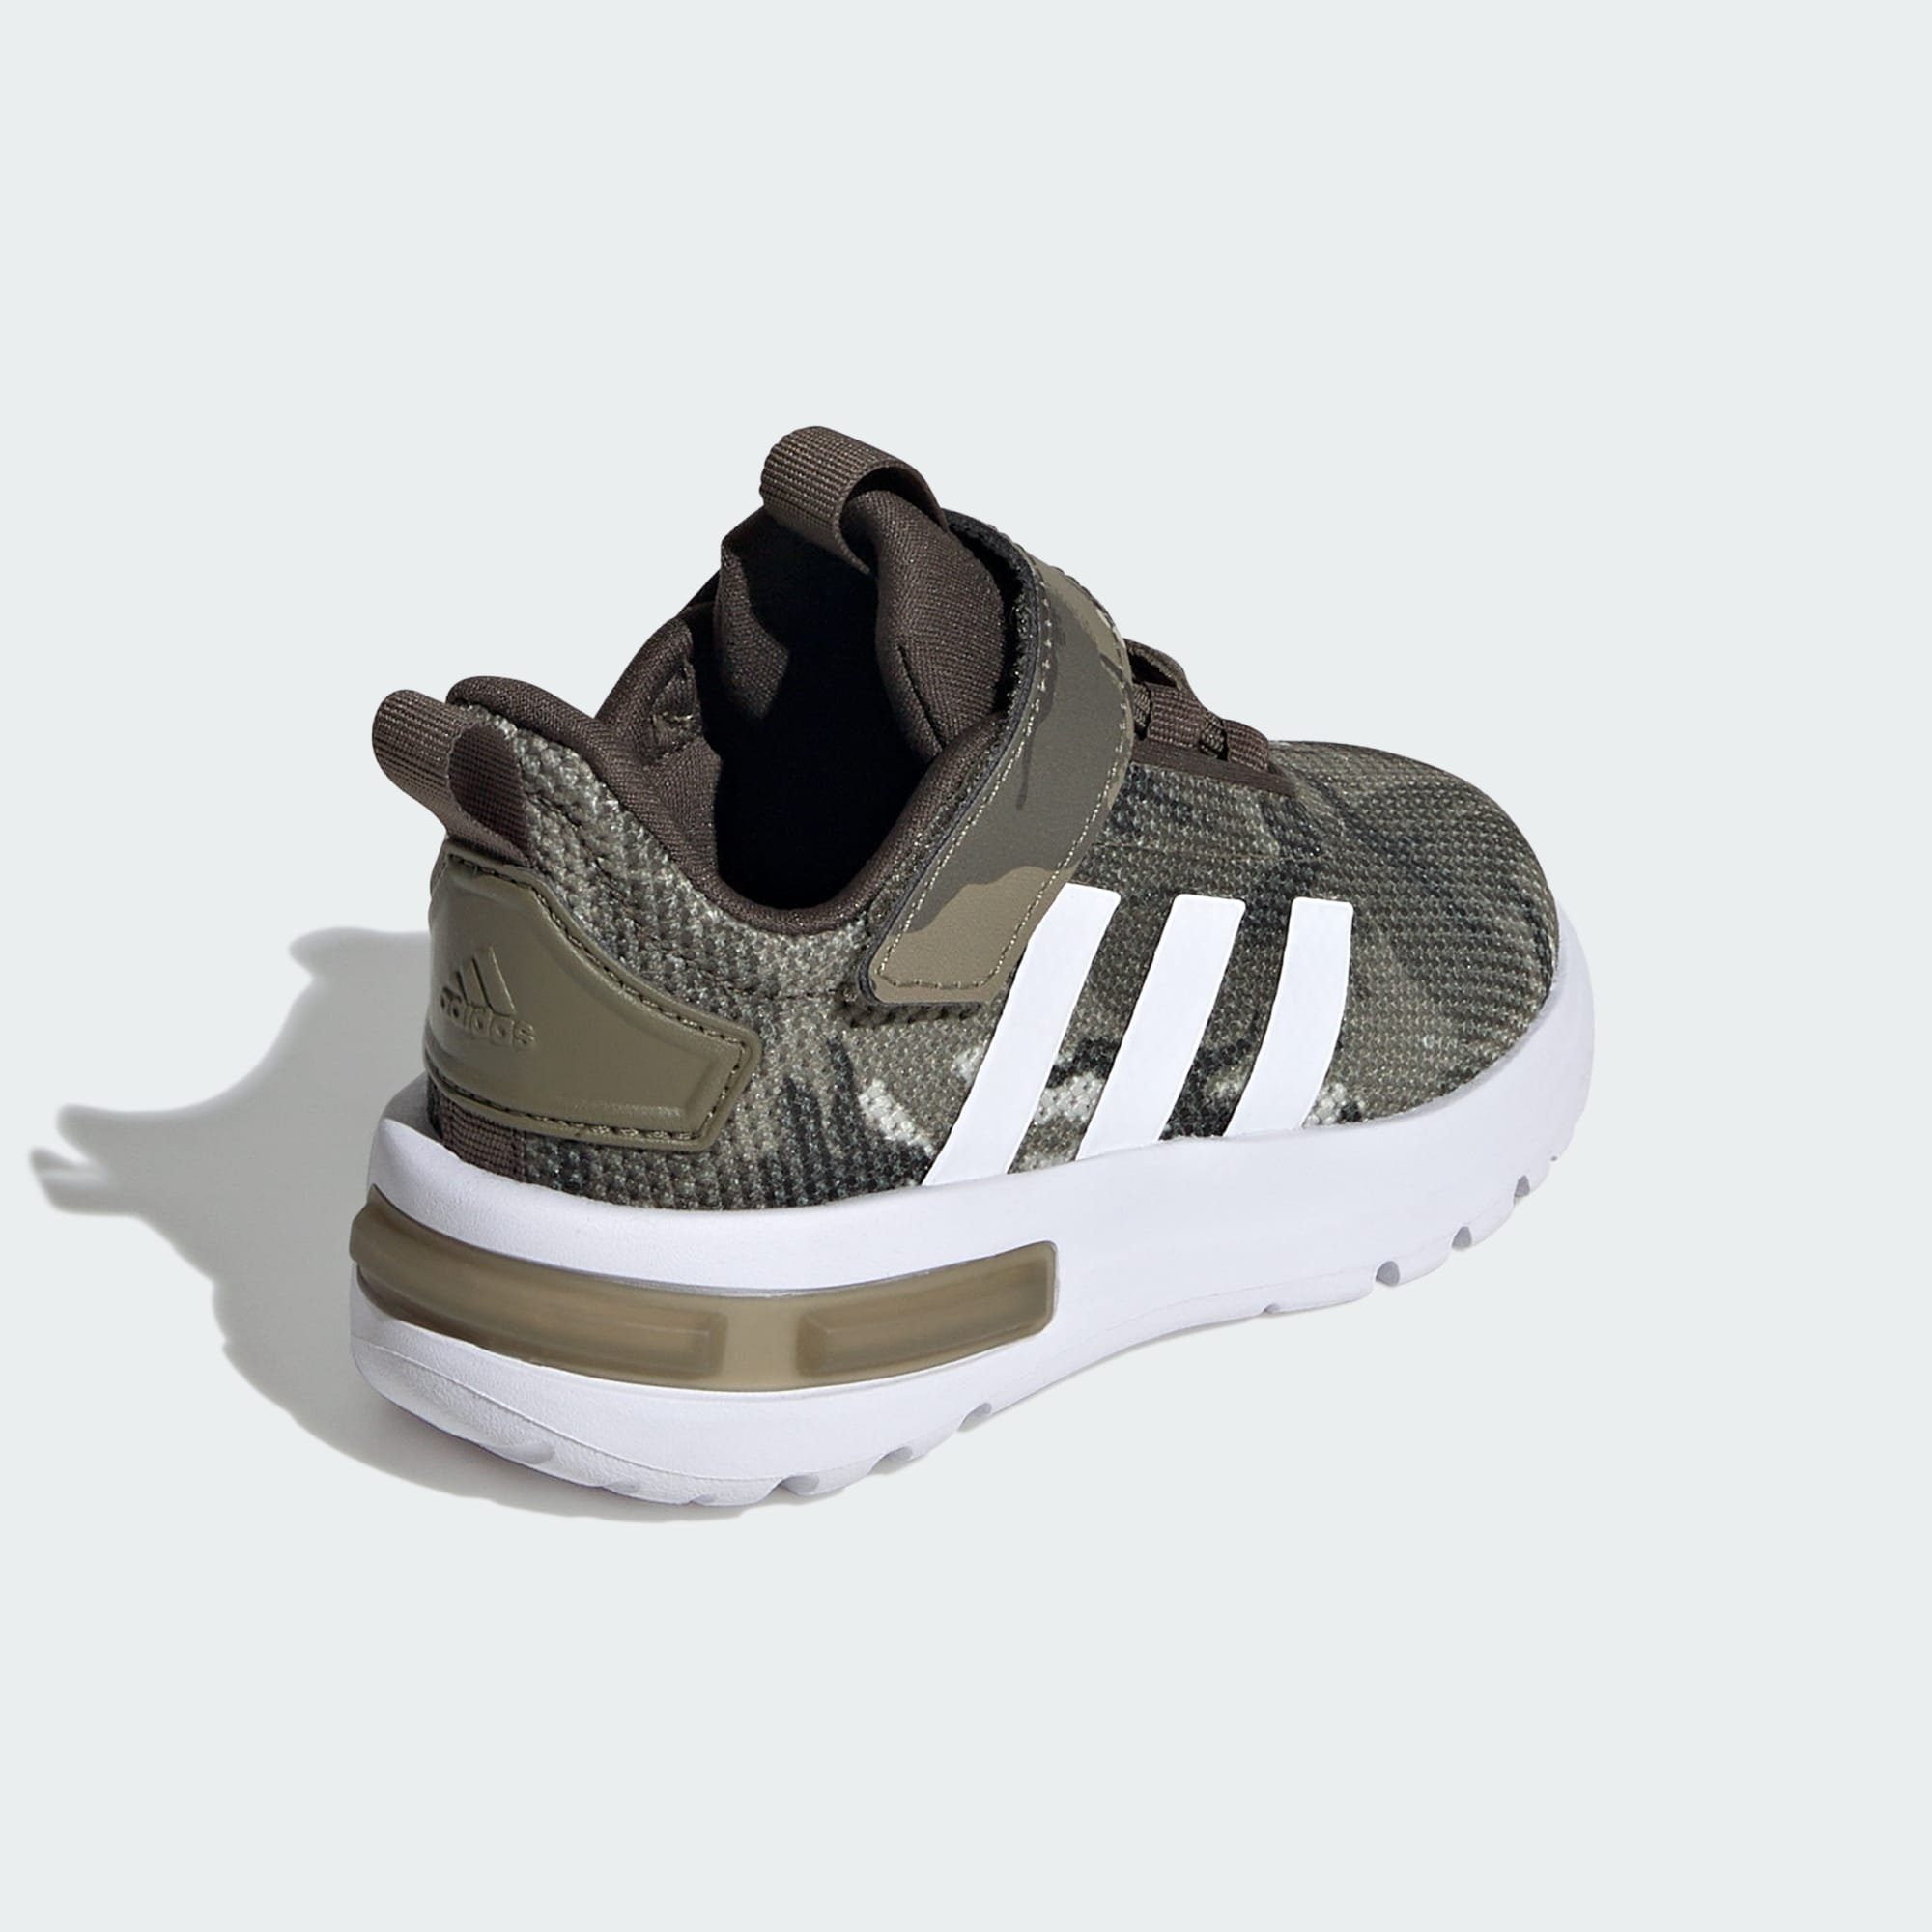 White Sneaker SCHUH / Cloud Strata Olive / Olive Shadow Sportswear adidas KIDS RACER TR23